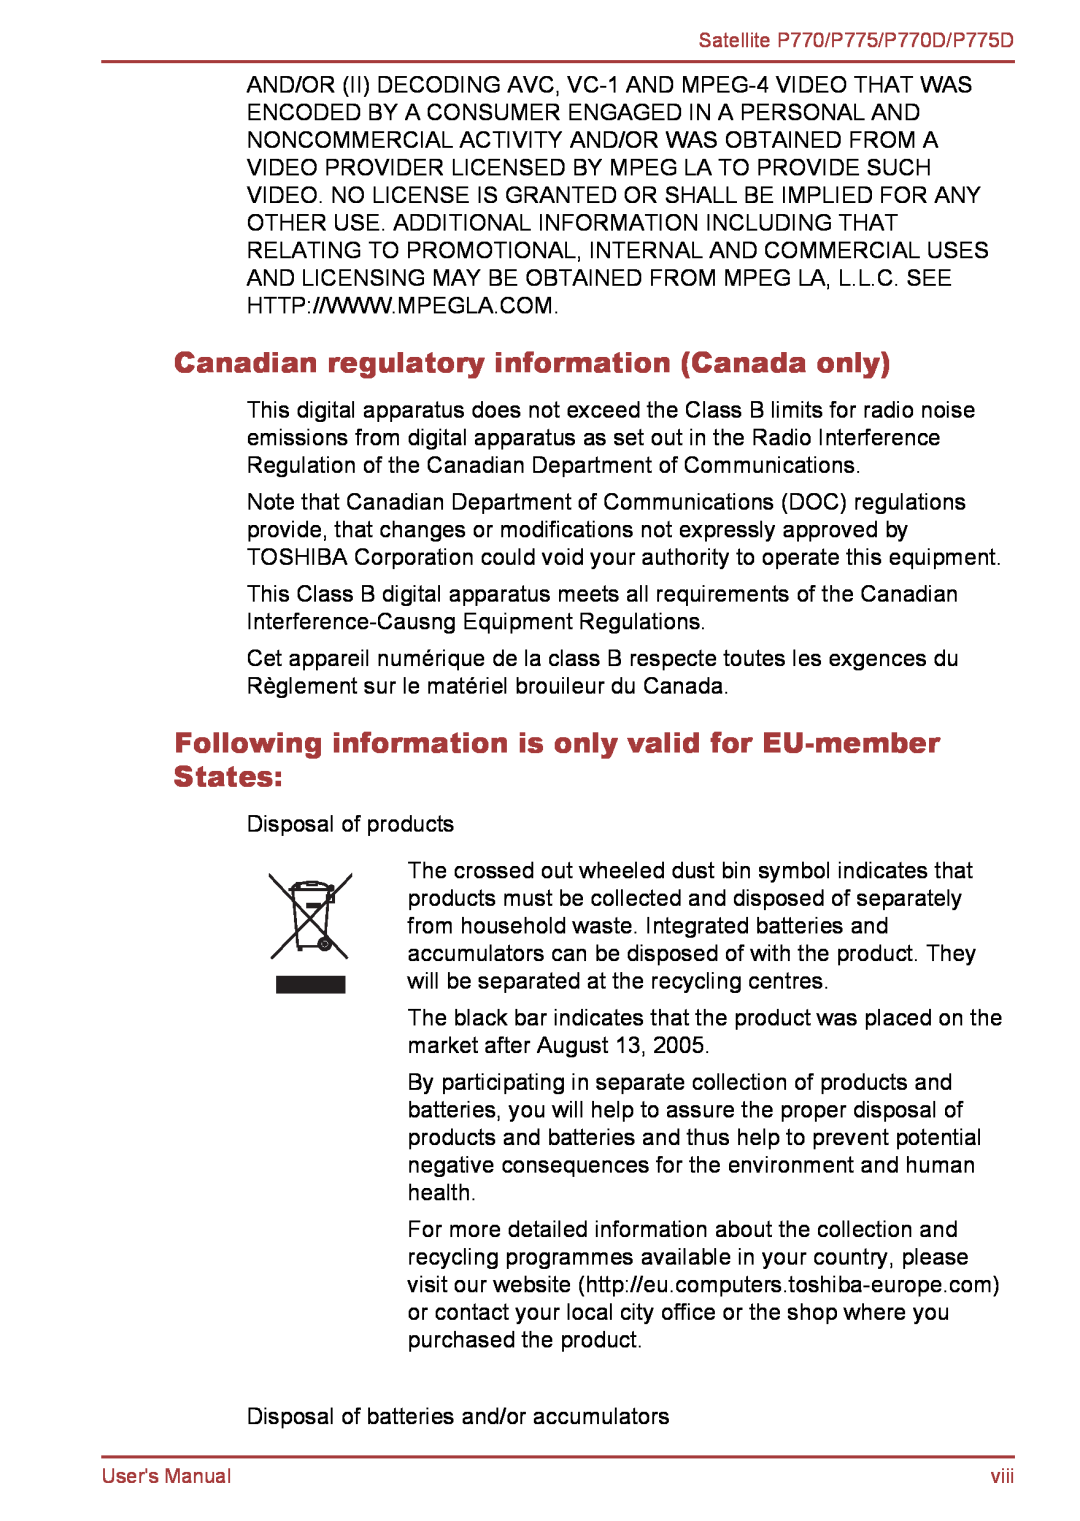 Toshiba P770 Canadian regulatory information Canada only, Following information is only valid for EU-member States 